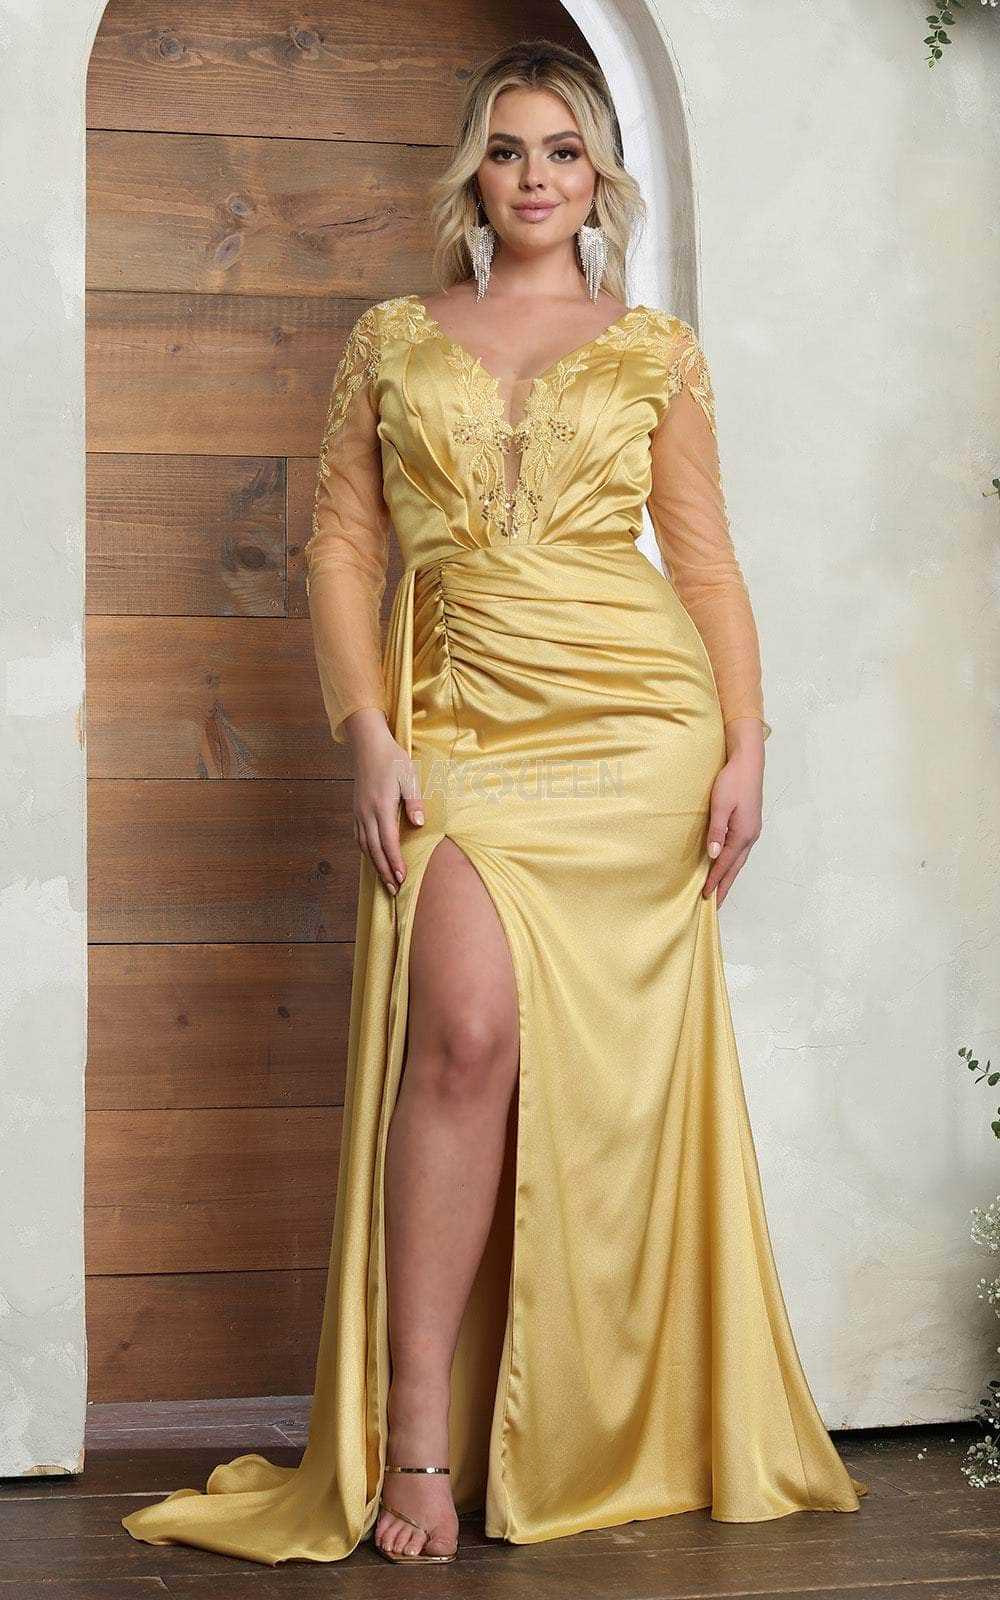 May Queen, May Queen RQ8045 - Sheer Long Sleeve Ruched Prom Gown